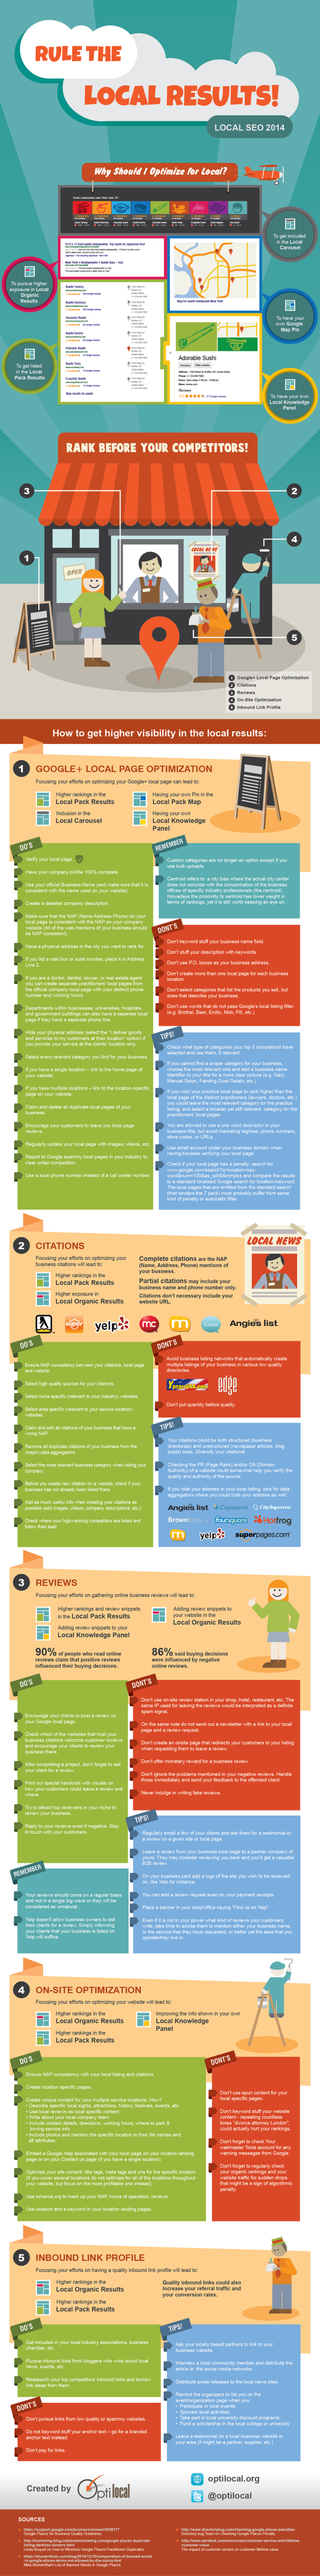 Optilocal_Infographic_Rule_the_Local_Results_v2(1)